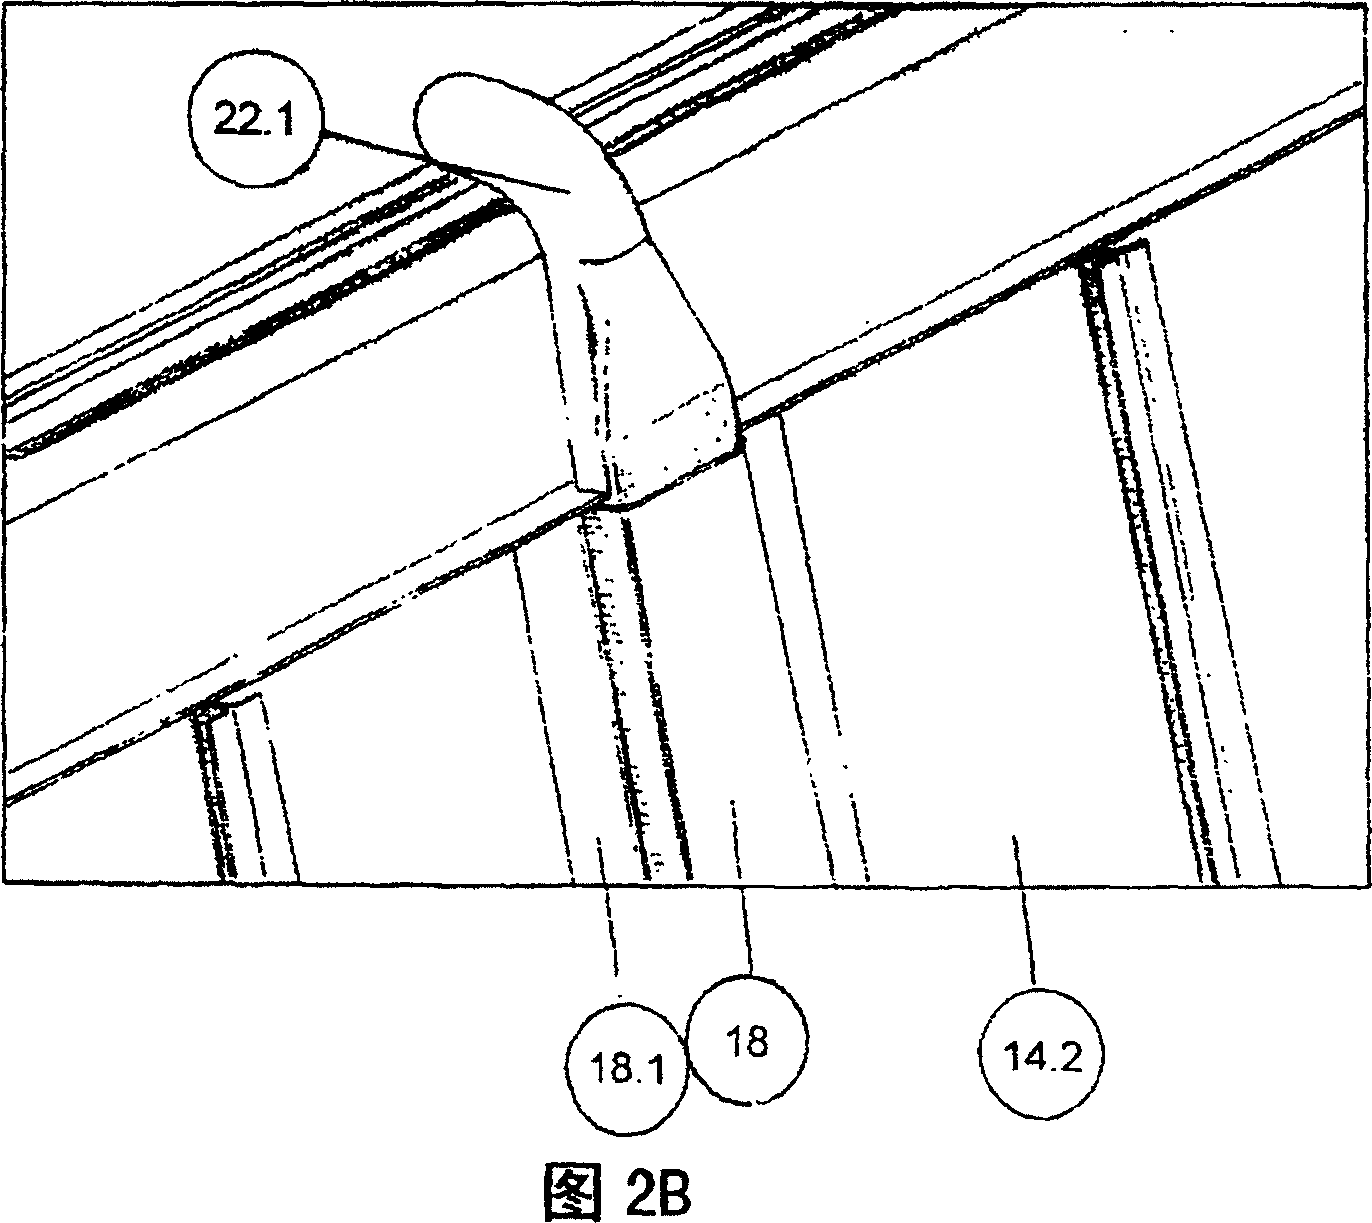 Elevator cabin with integrated ventilation system